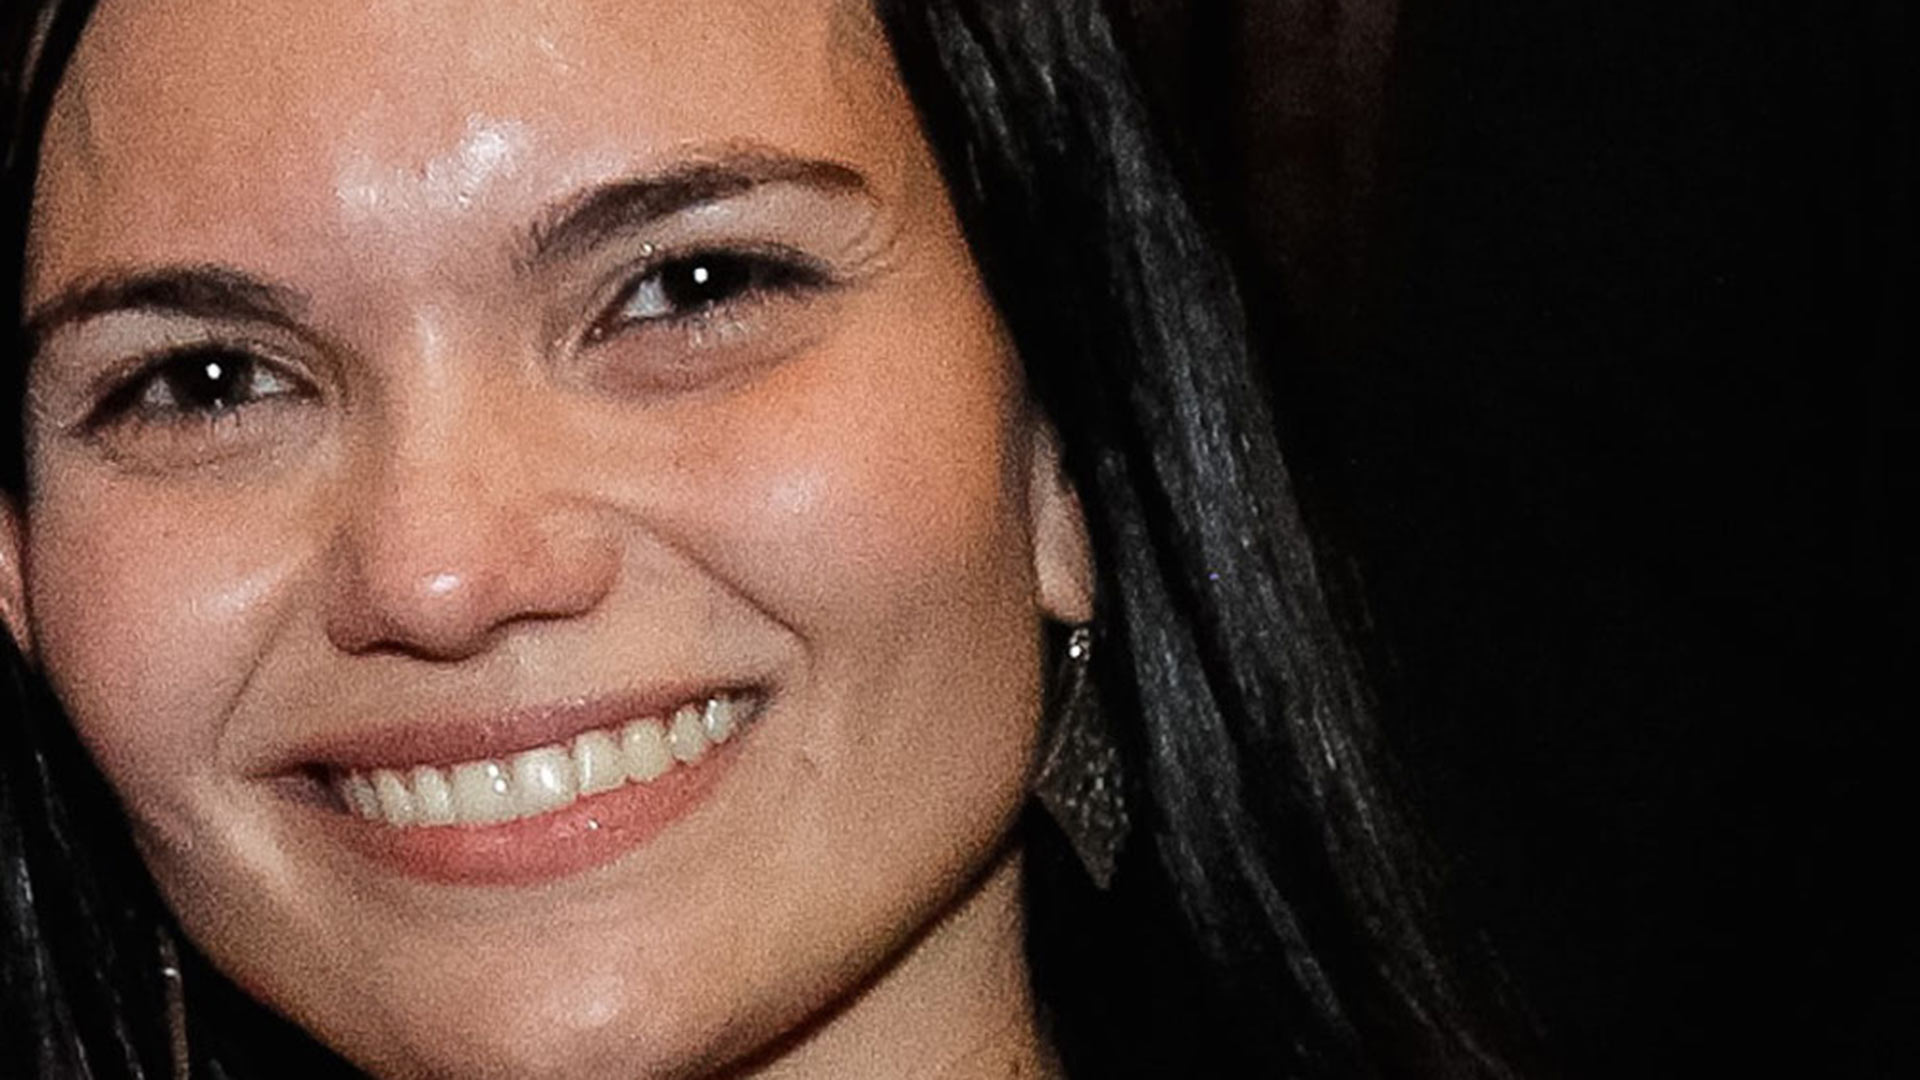 A woman with long black hair smiling for the camera.